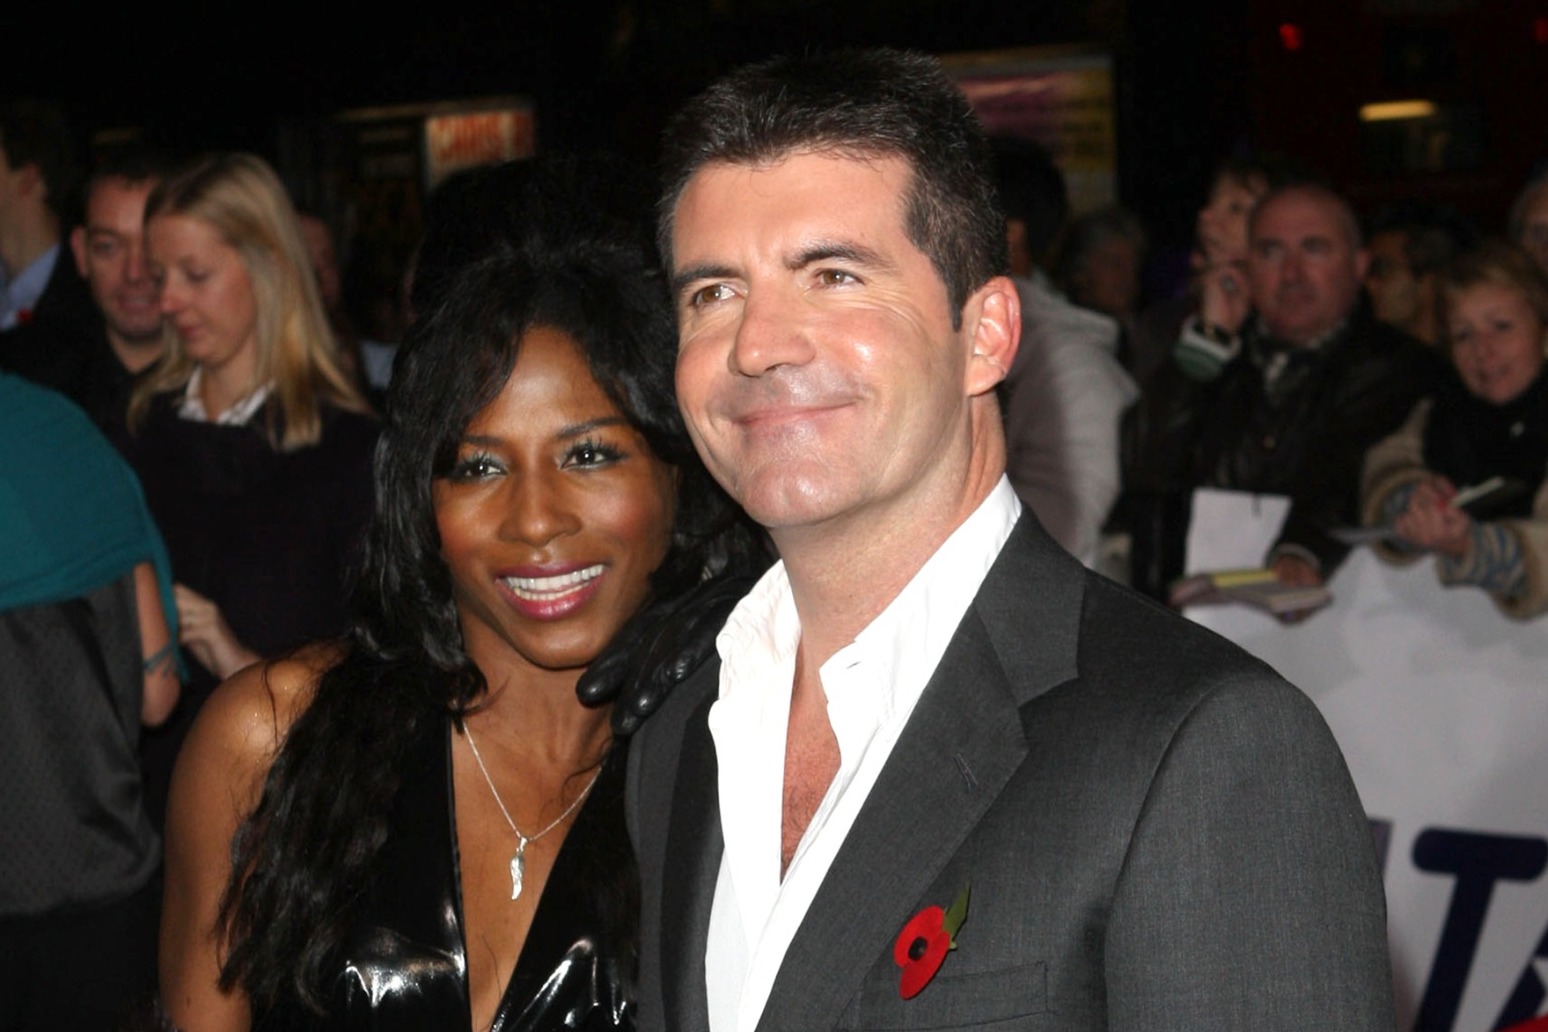 It is Simon Cowells desire to bring back The X Factor says Sinitta